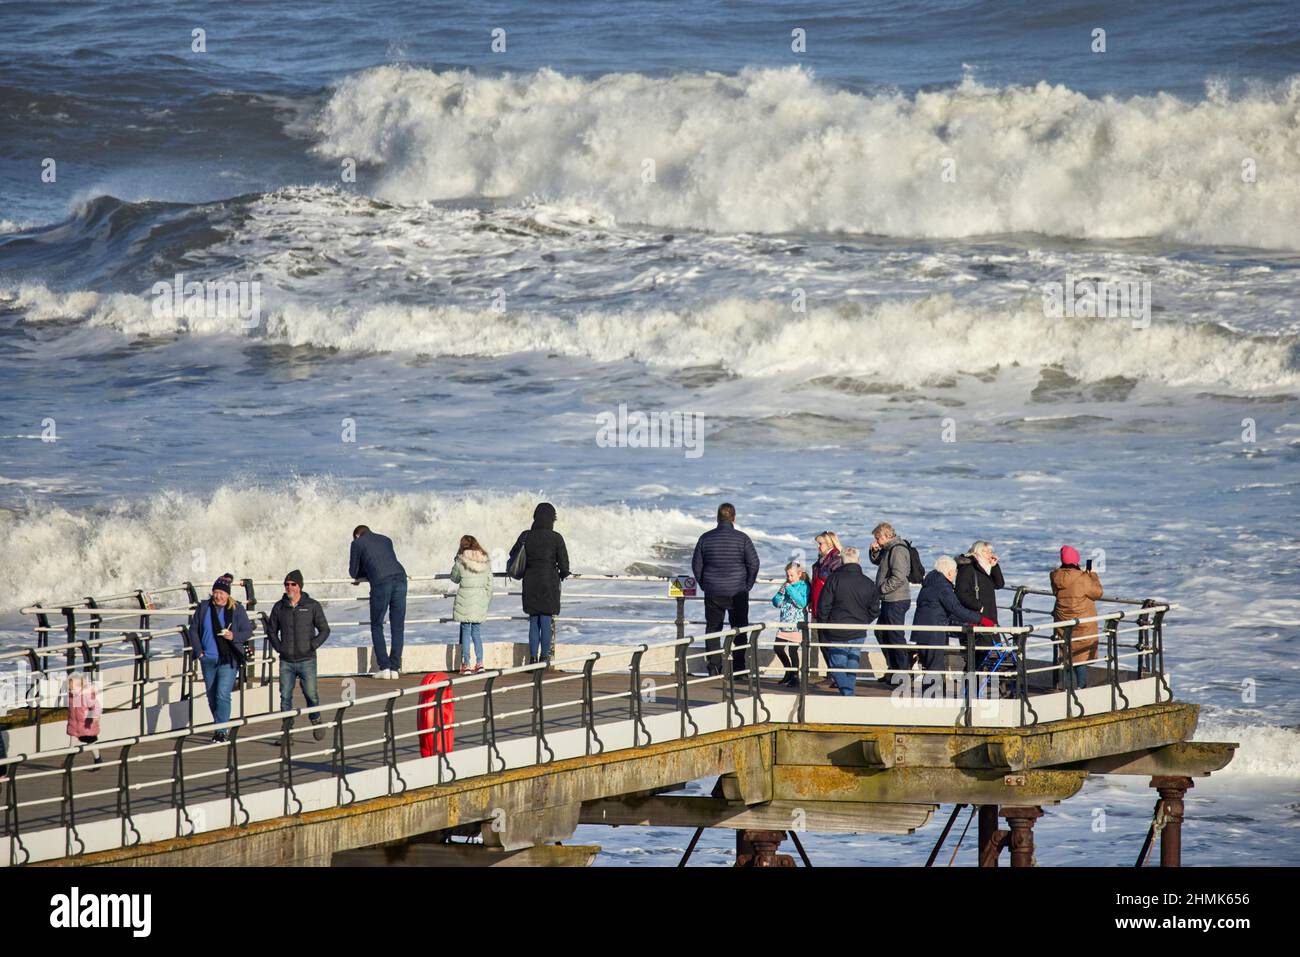 Grade II* listed Saltburn Pier, Rough North Sea waves at the pier Saltburn-by-the-Sea, Redcar and Cleveland, North Yorkshire, England Stock Photo